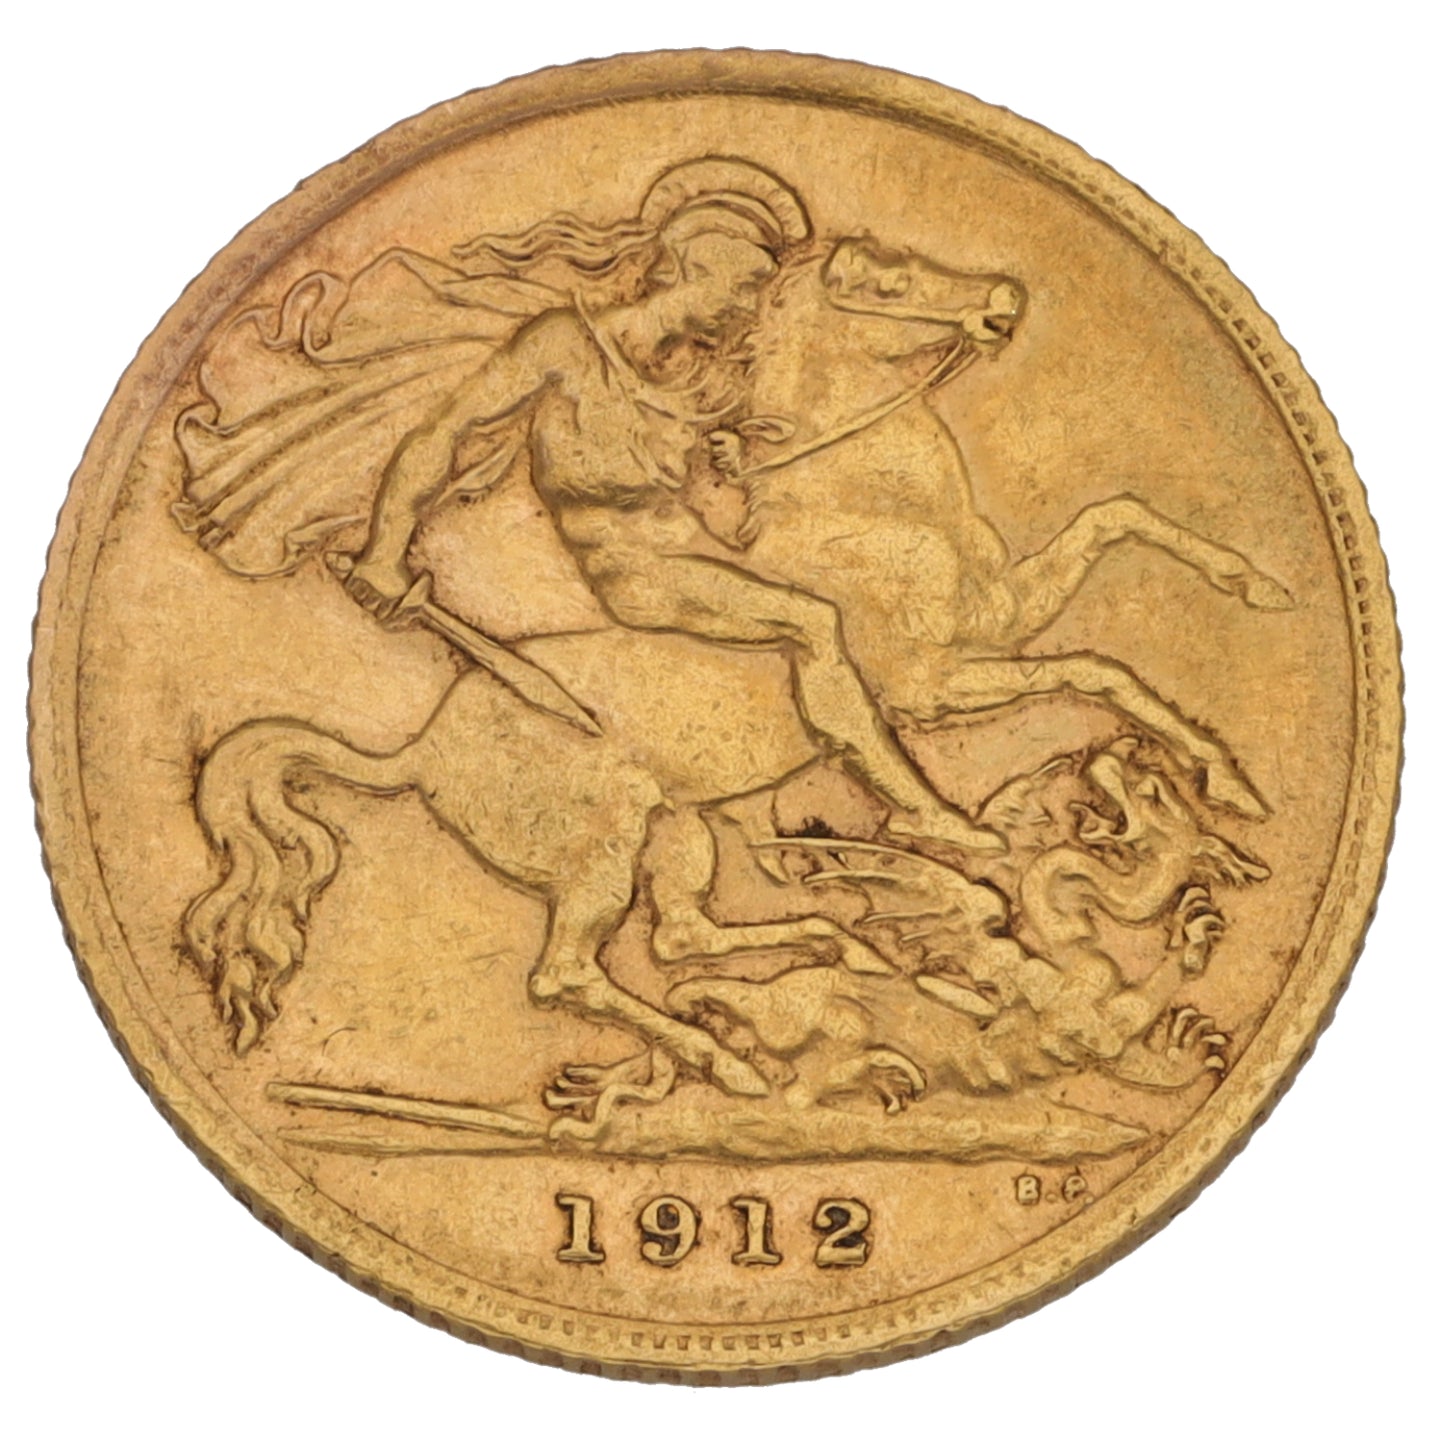 22ct Gold King George V Half Sovereign Coin 1912